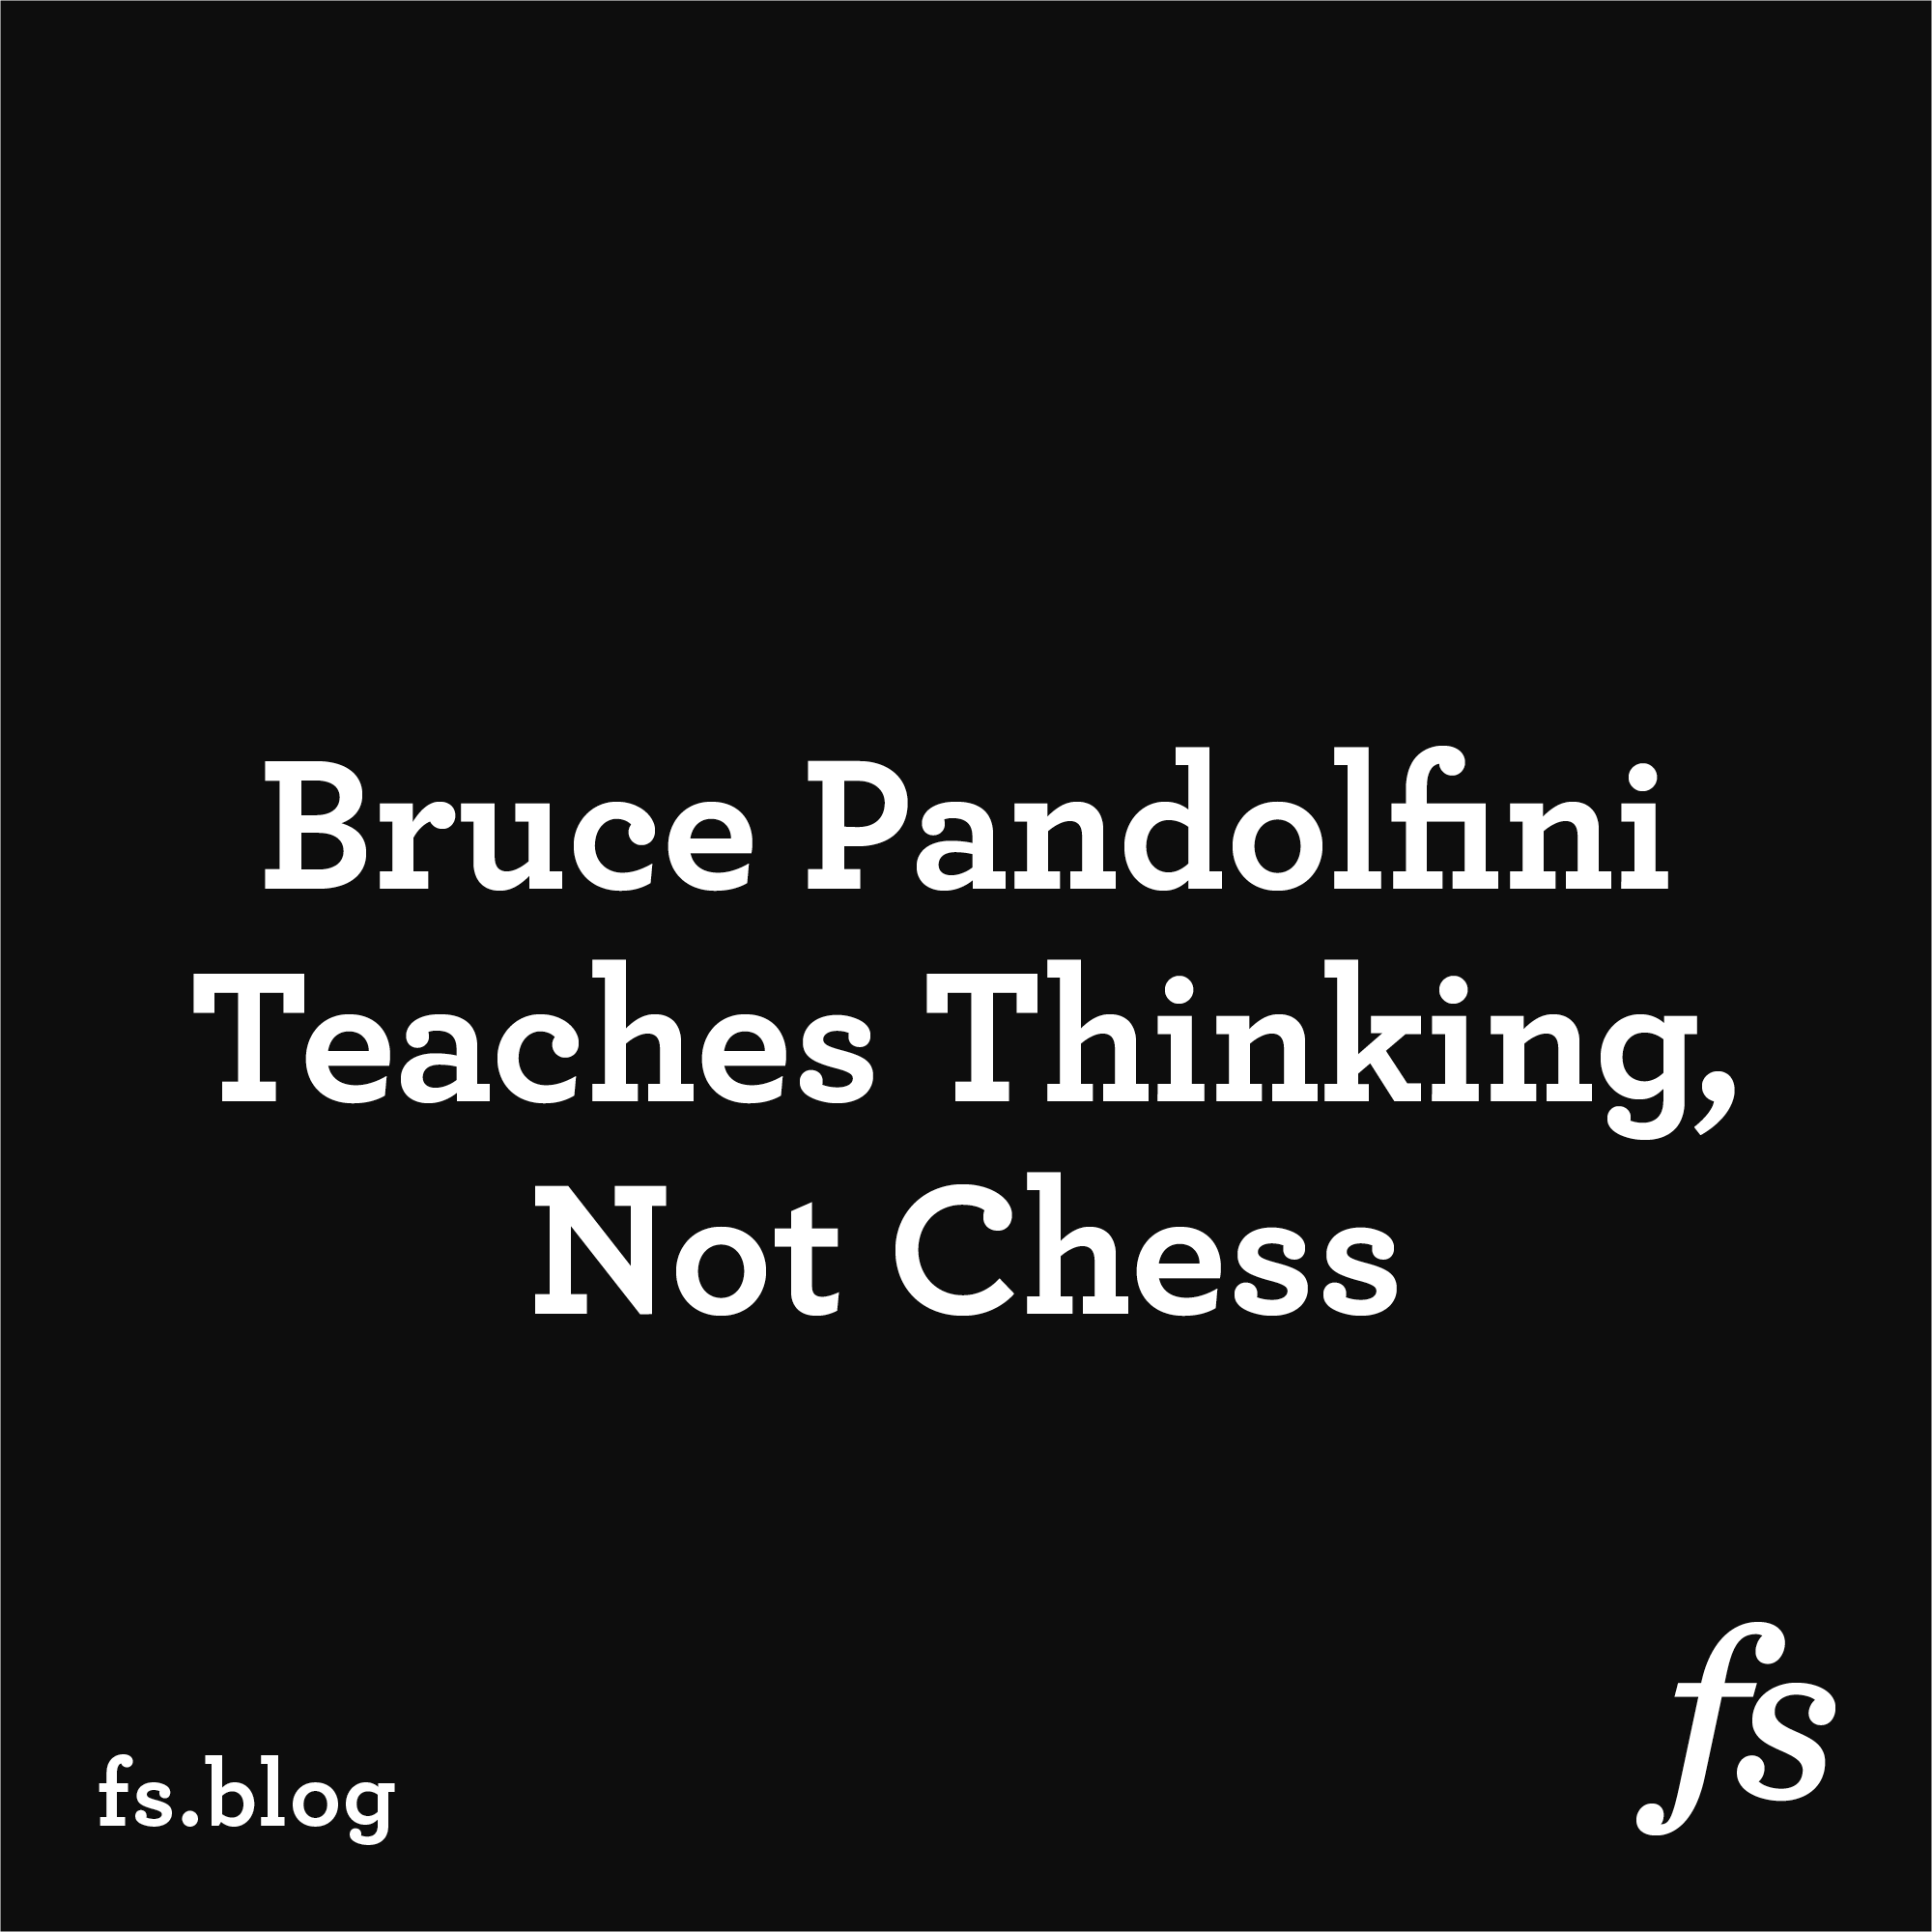 Every Move Must Have a Purpose: by Pandolfini, Bruce